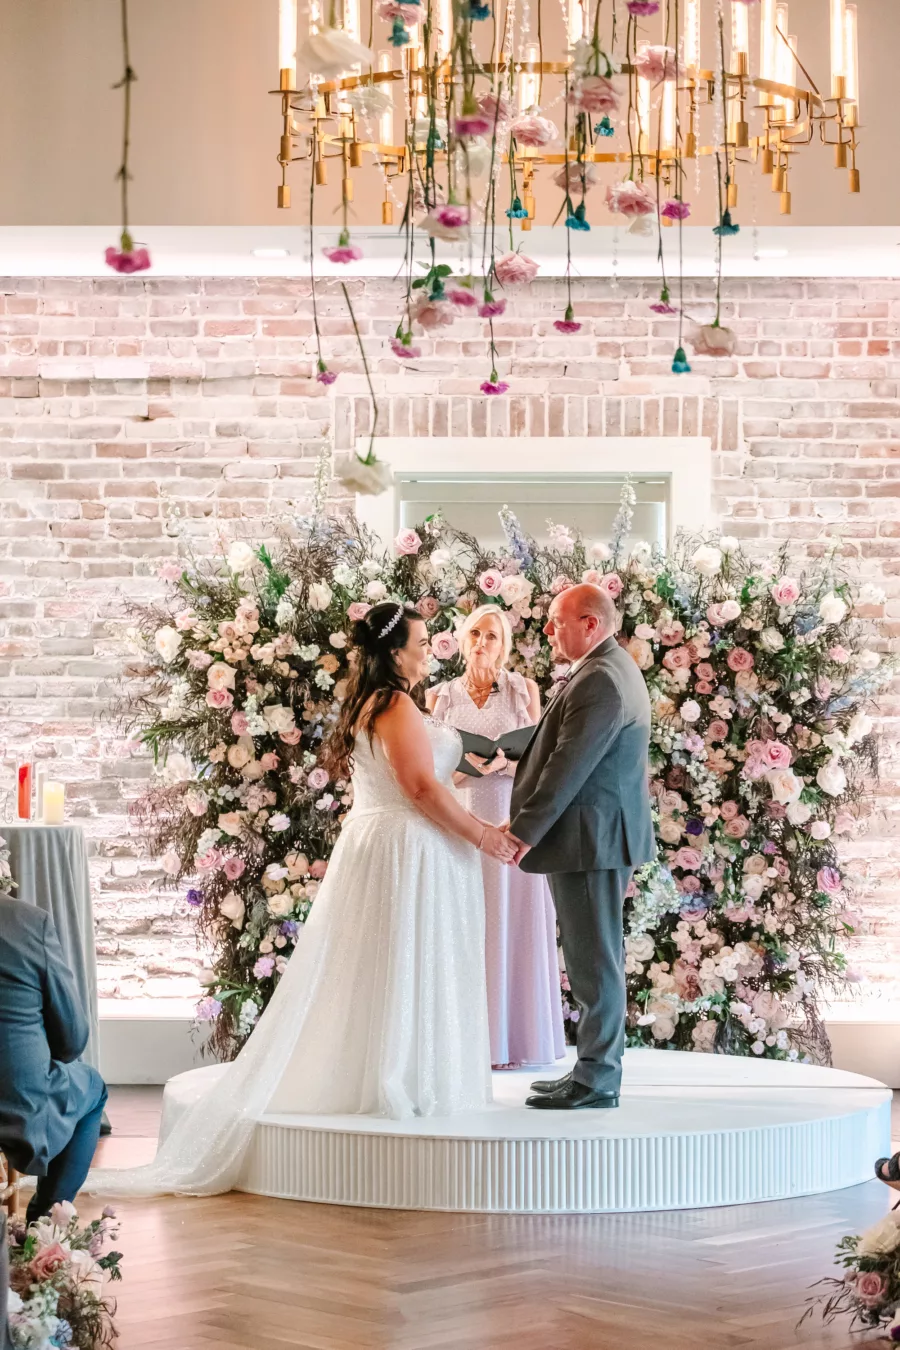 Whimsical Indoor Wedding Reception Ideas | Whimcial Pink Roses, White Hydrangeas, Blue Stock Flowers, and Greenery Backdrop Inspiration | Hanging Rose and Carnation Chandelier